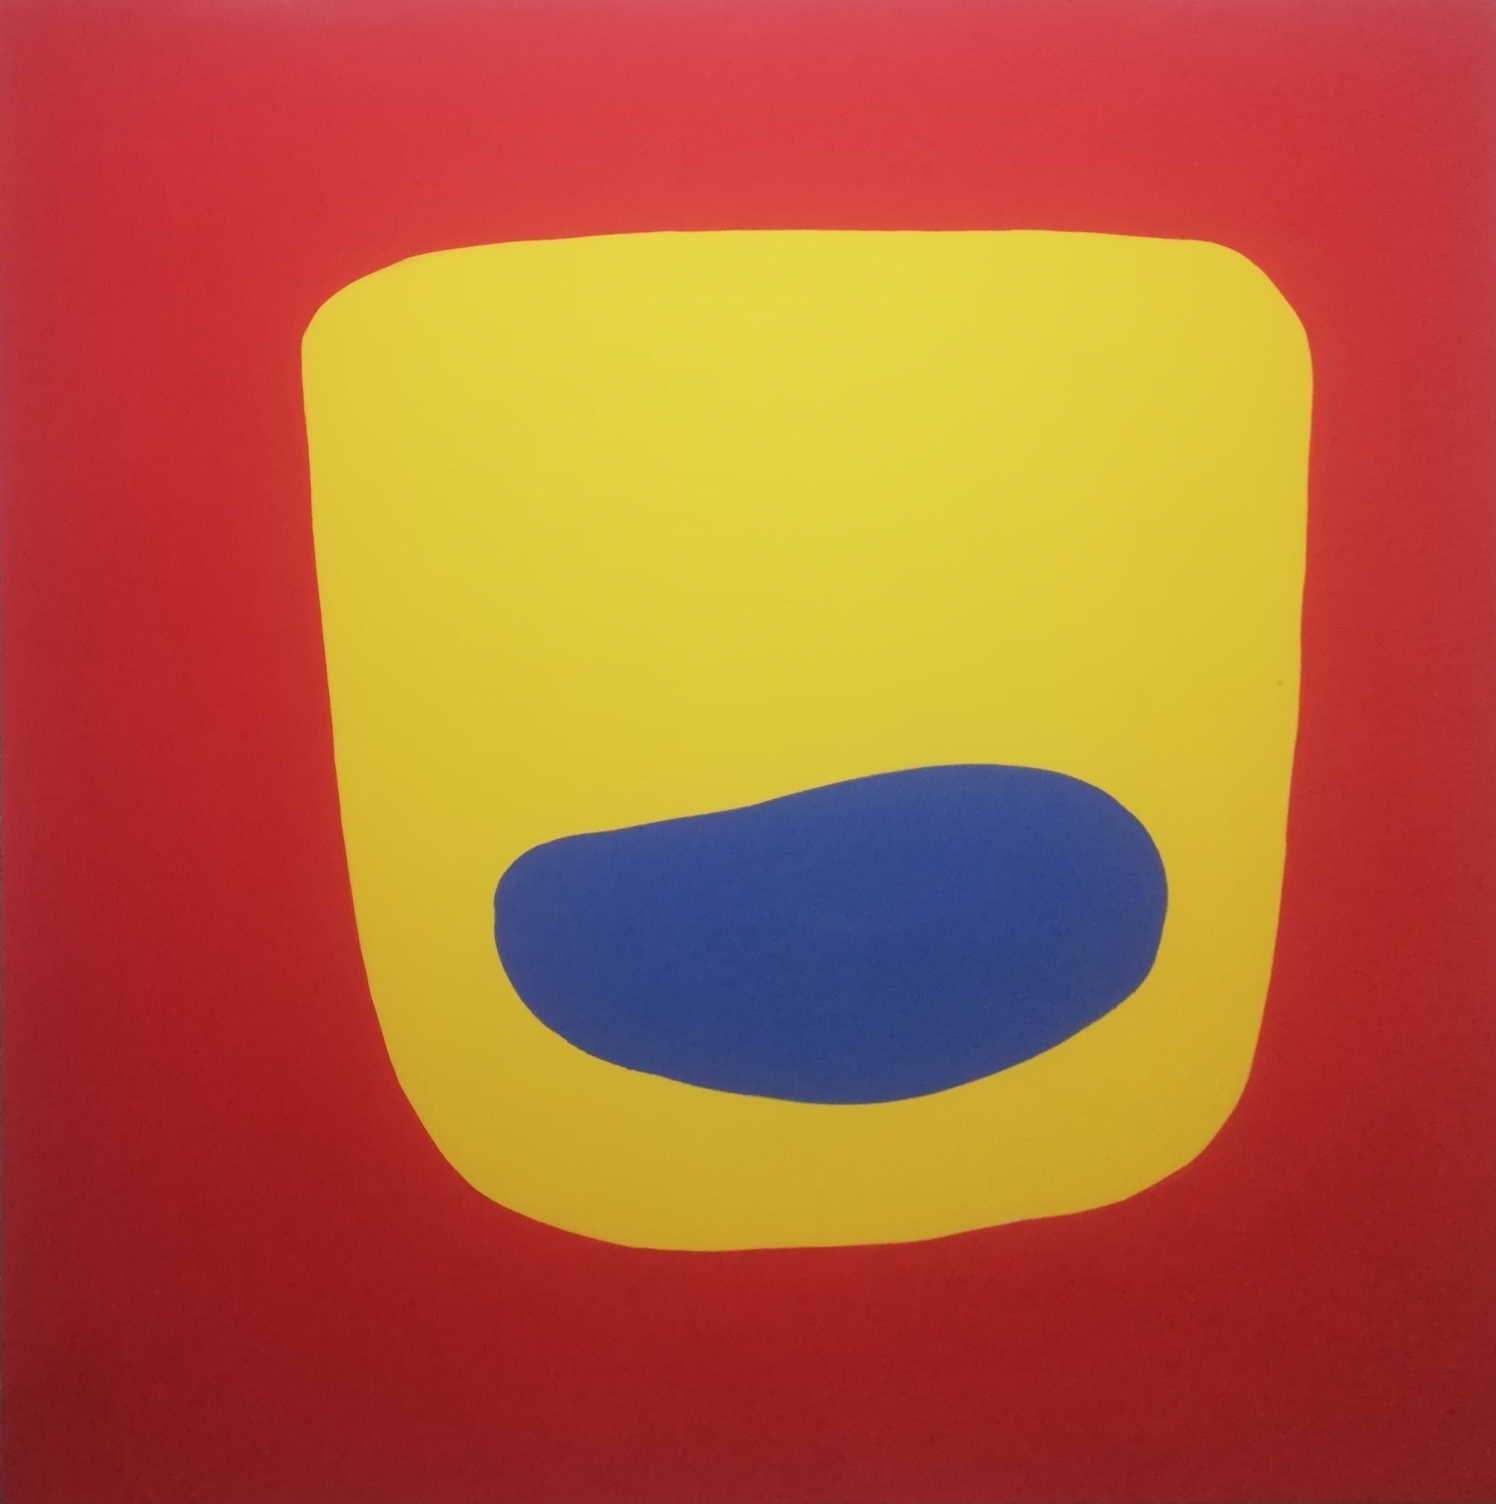 Artist: Sania Rajput  <br>Container - red blue yellow<br>Medium: Emulsion and acrylic on canvas <br> Size: 4'×4'